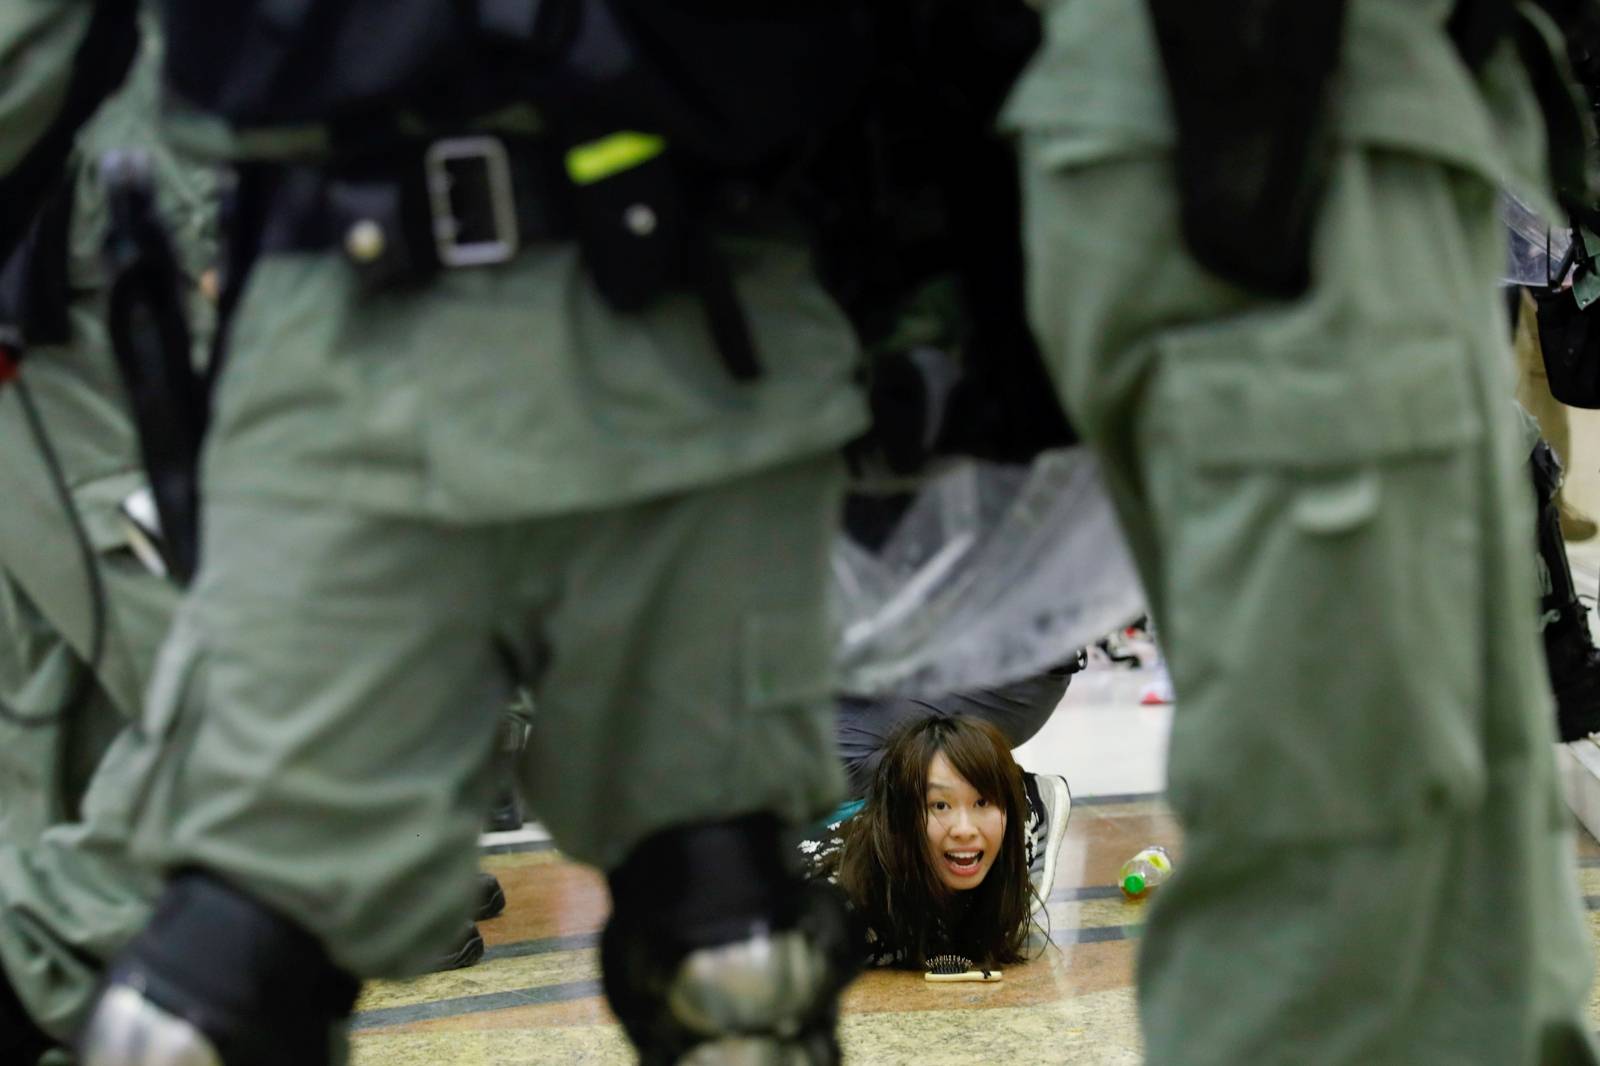 Riot police detain an anti-government protester at a shopping mall in Tai Po, Hong Kong